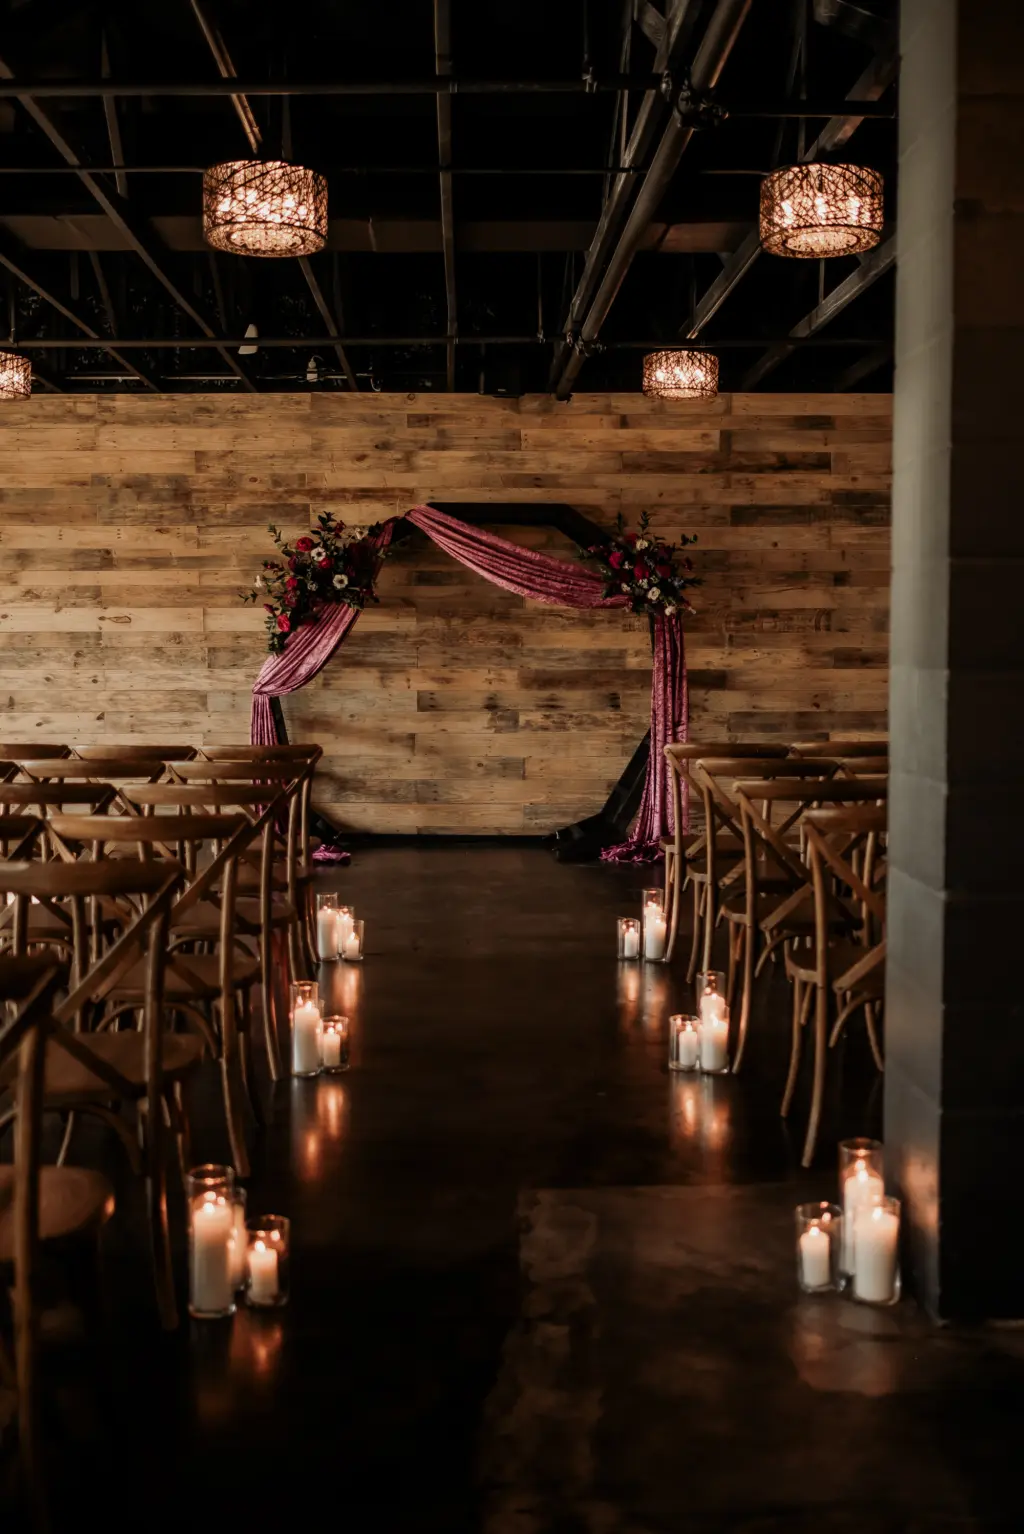 Dark and Moody Wedding Ceremony with Wooden Arch Draped in Purple Velvet, Crossback Chairs, and Pillar Candle Aisle Decor Ideas | Madeira Beach Venue The West Events